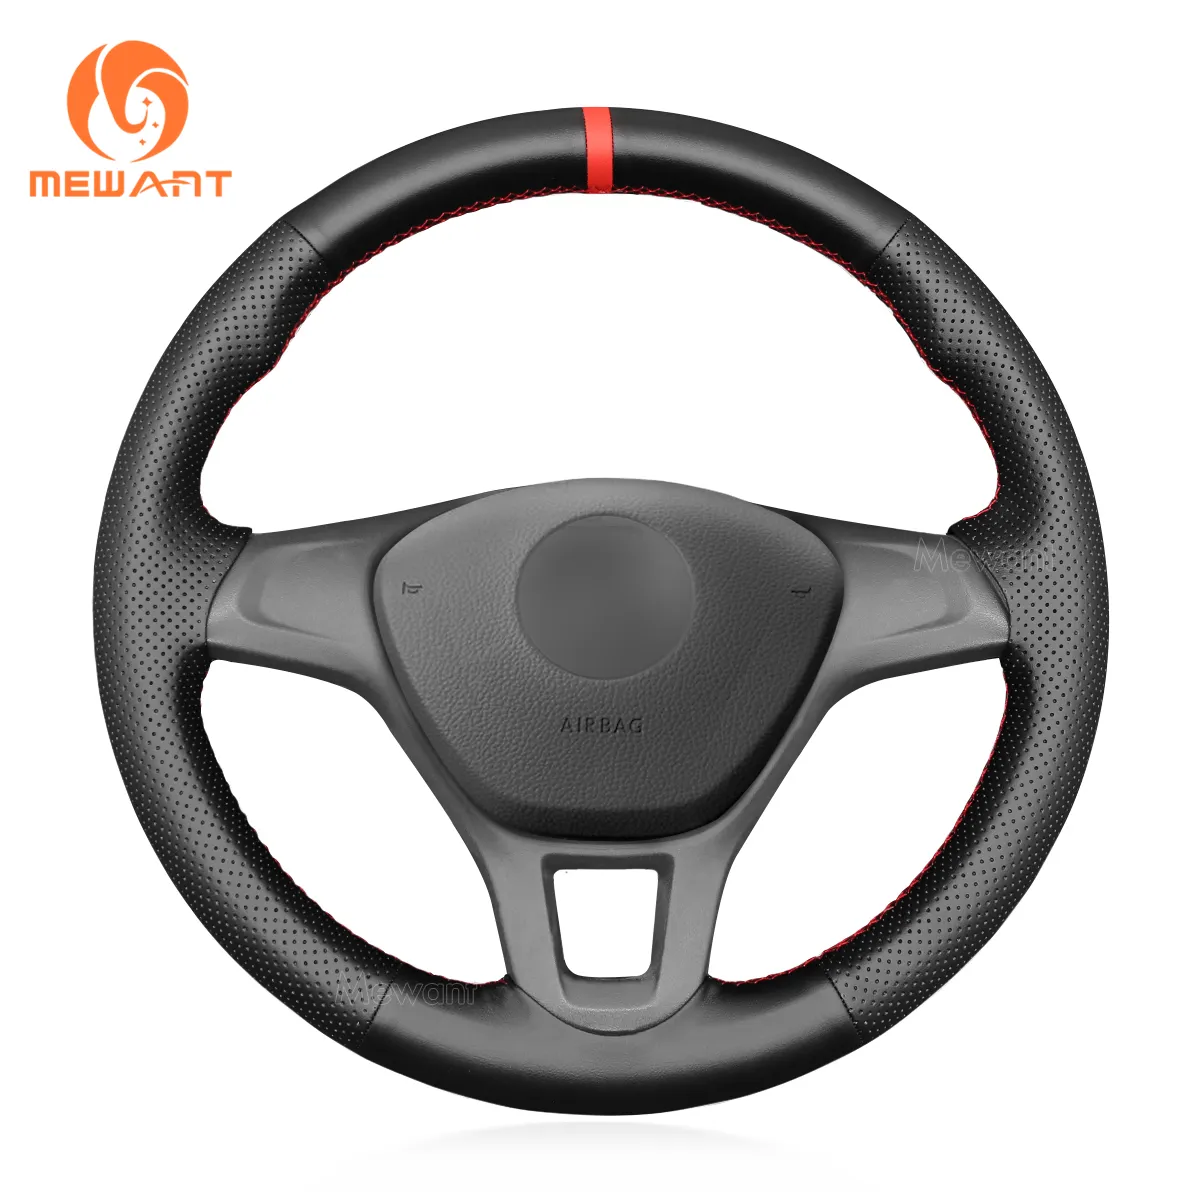 Hand Sewing Artificial Leather Steering Wheel Cover for VW Amarok T6 California Caravelle Kombi Multivan Transporter 2015 2016